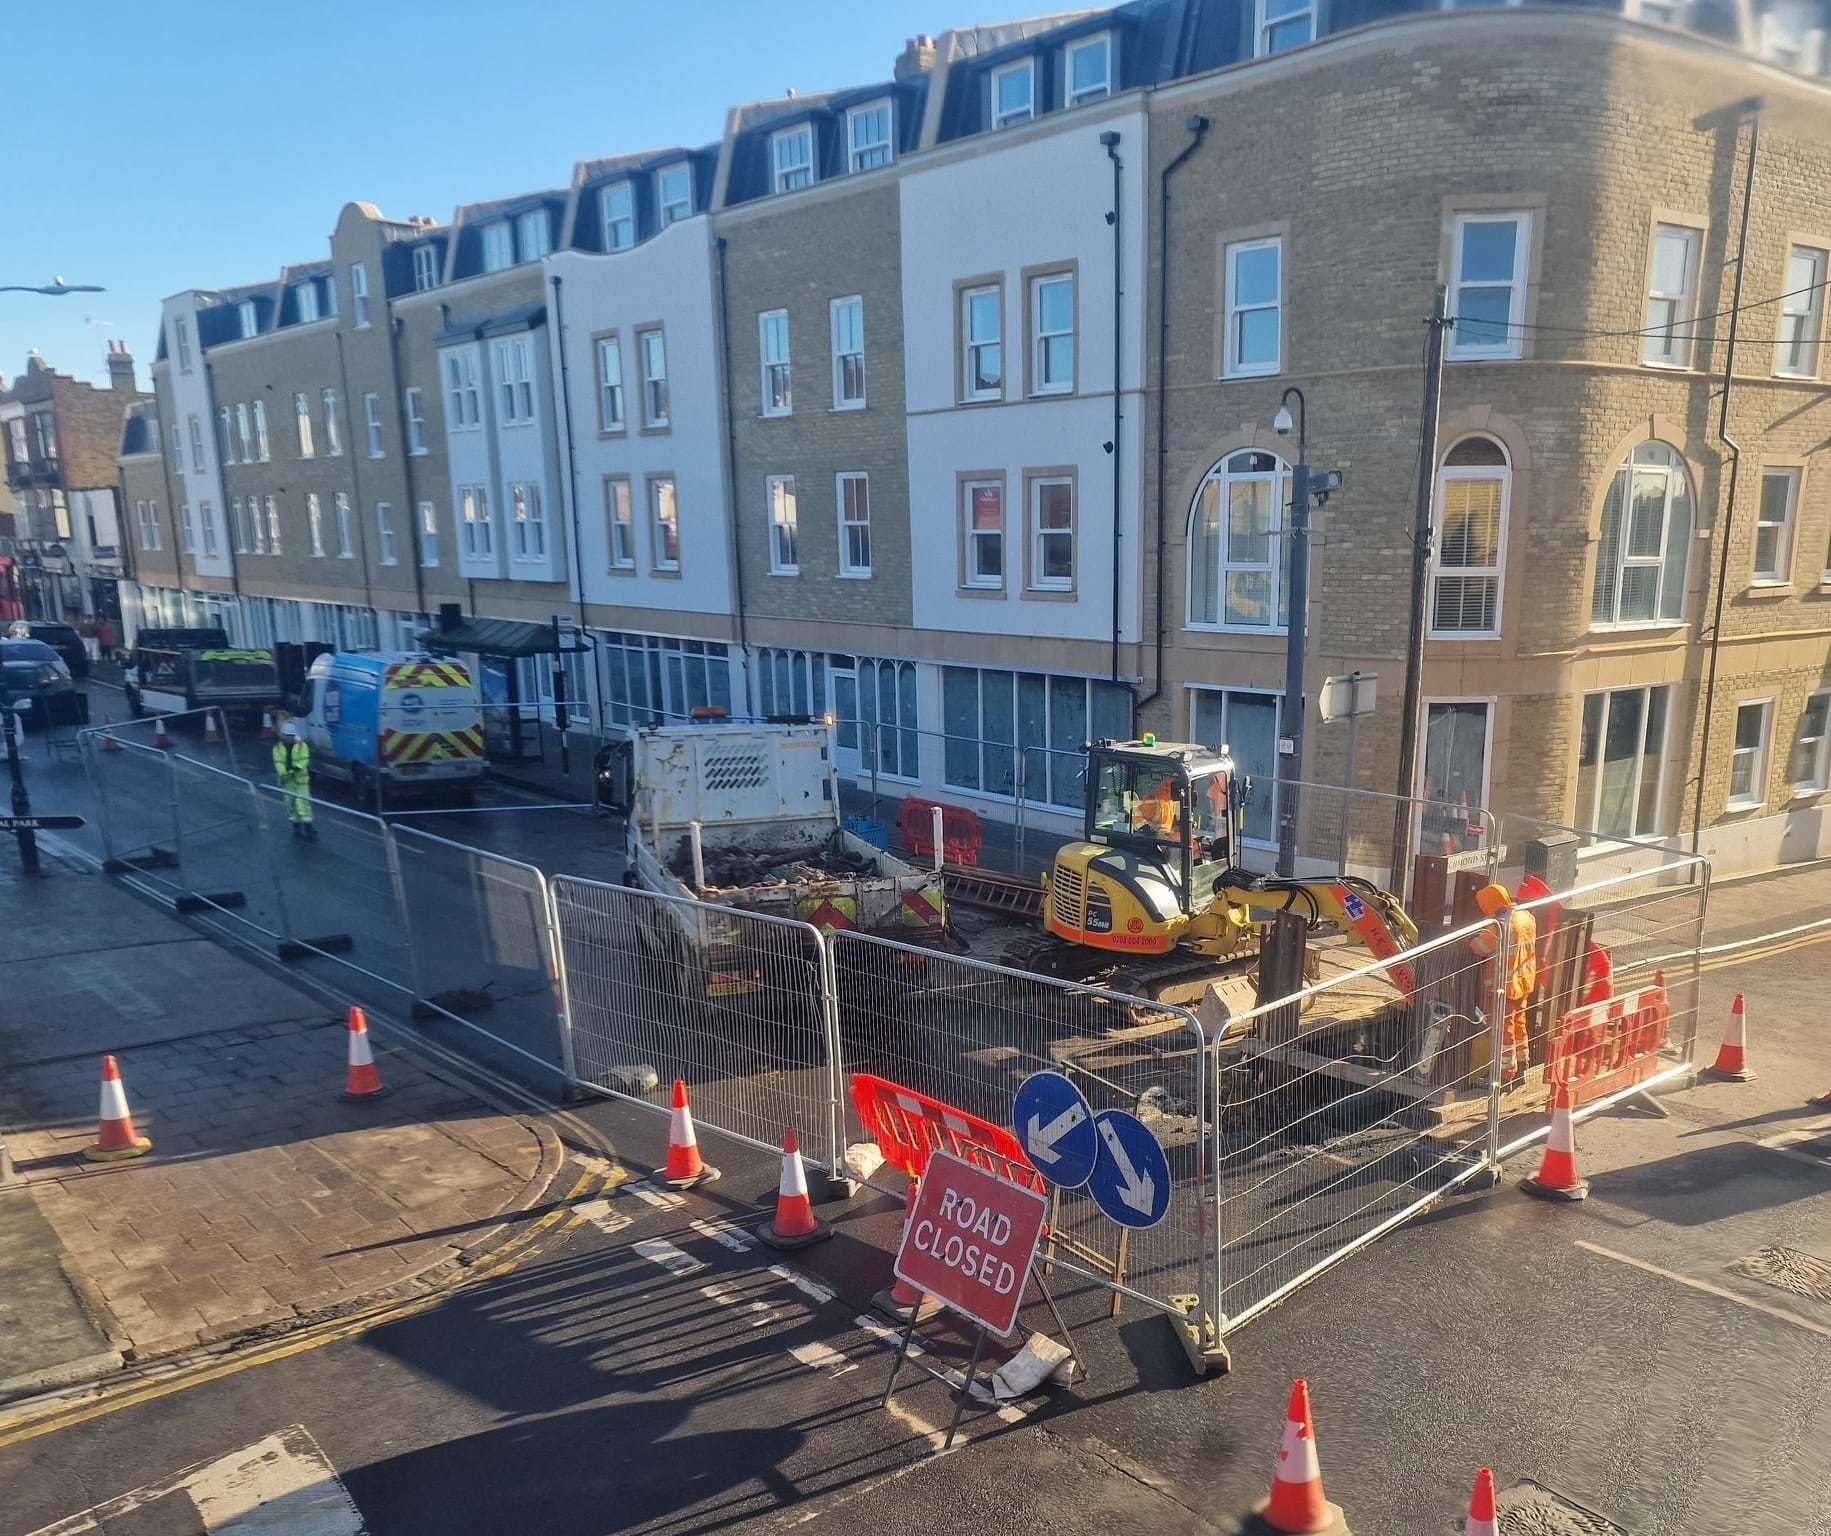 Herne Bay High Street has been sealed off for the underground repair works. Picture: Jacey Chilton